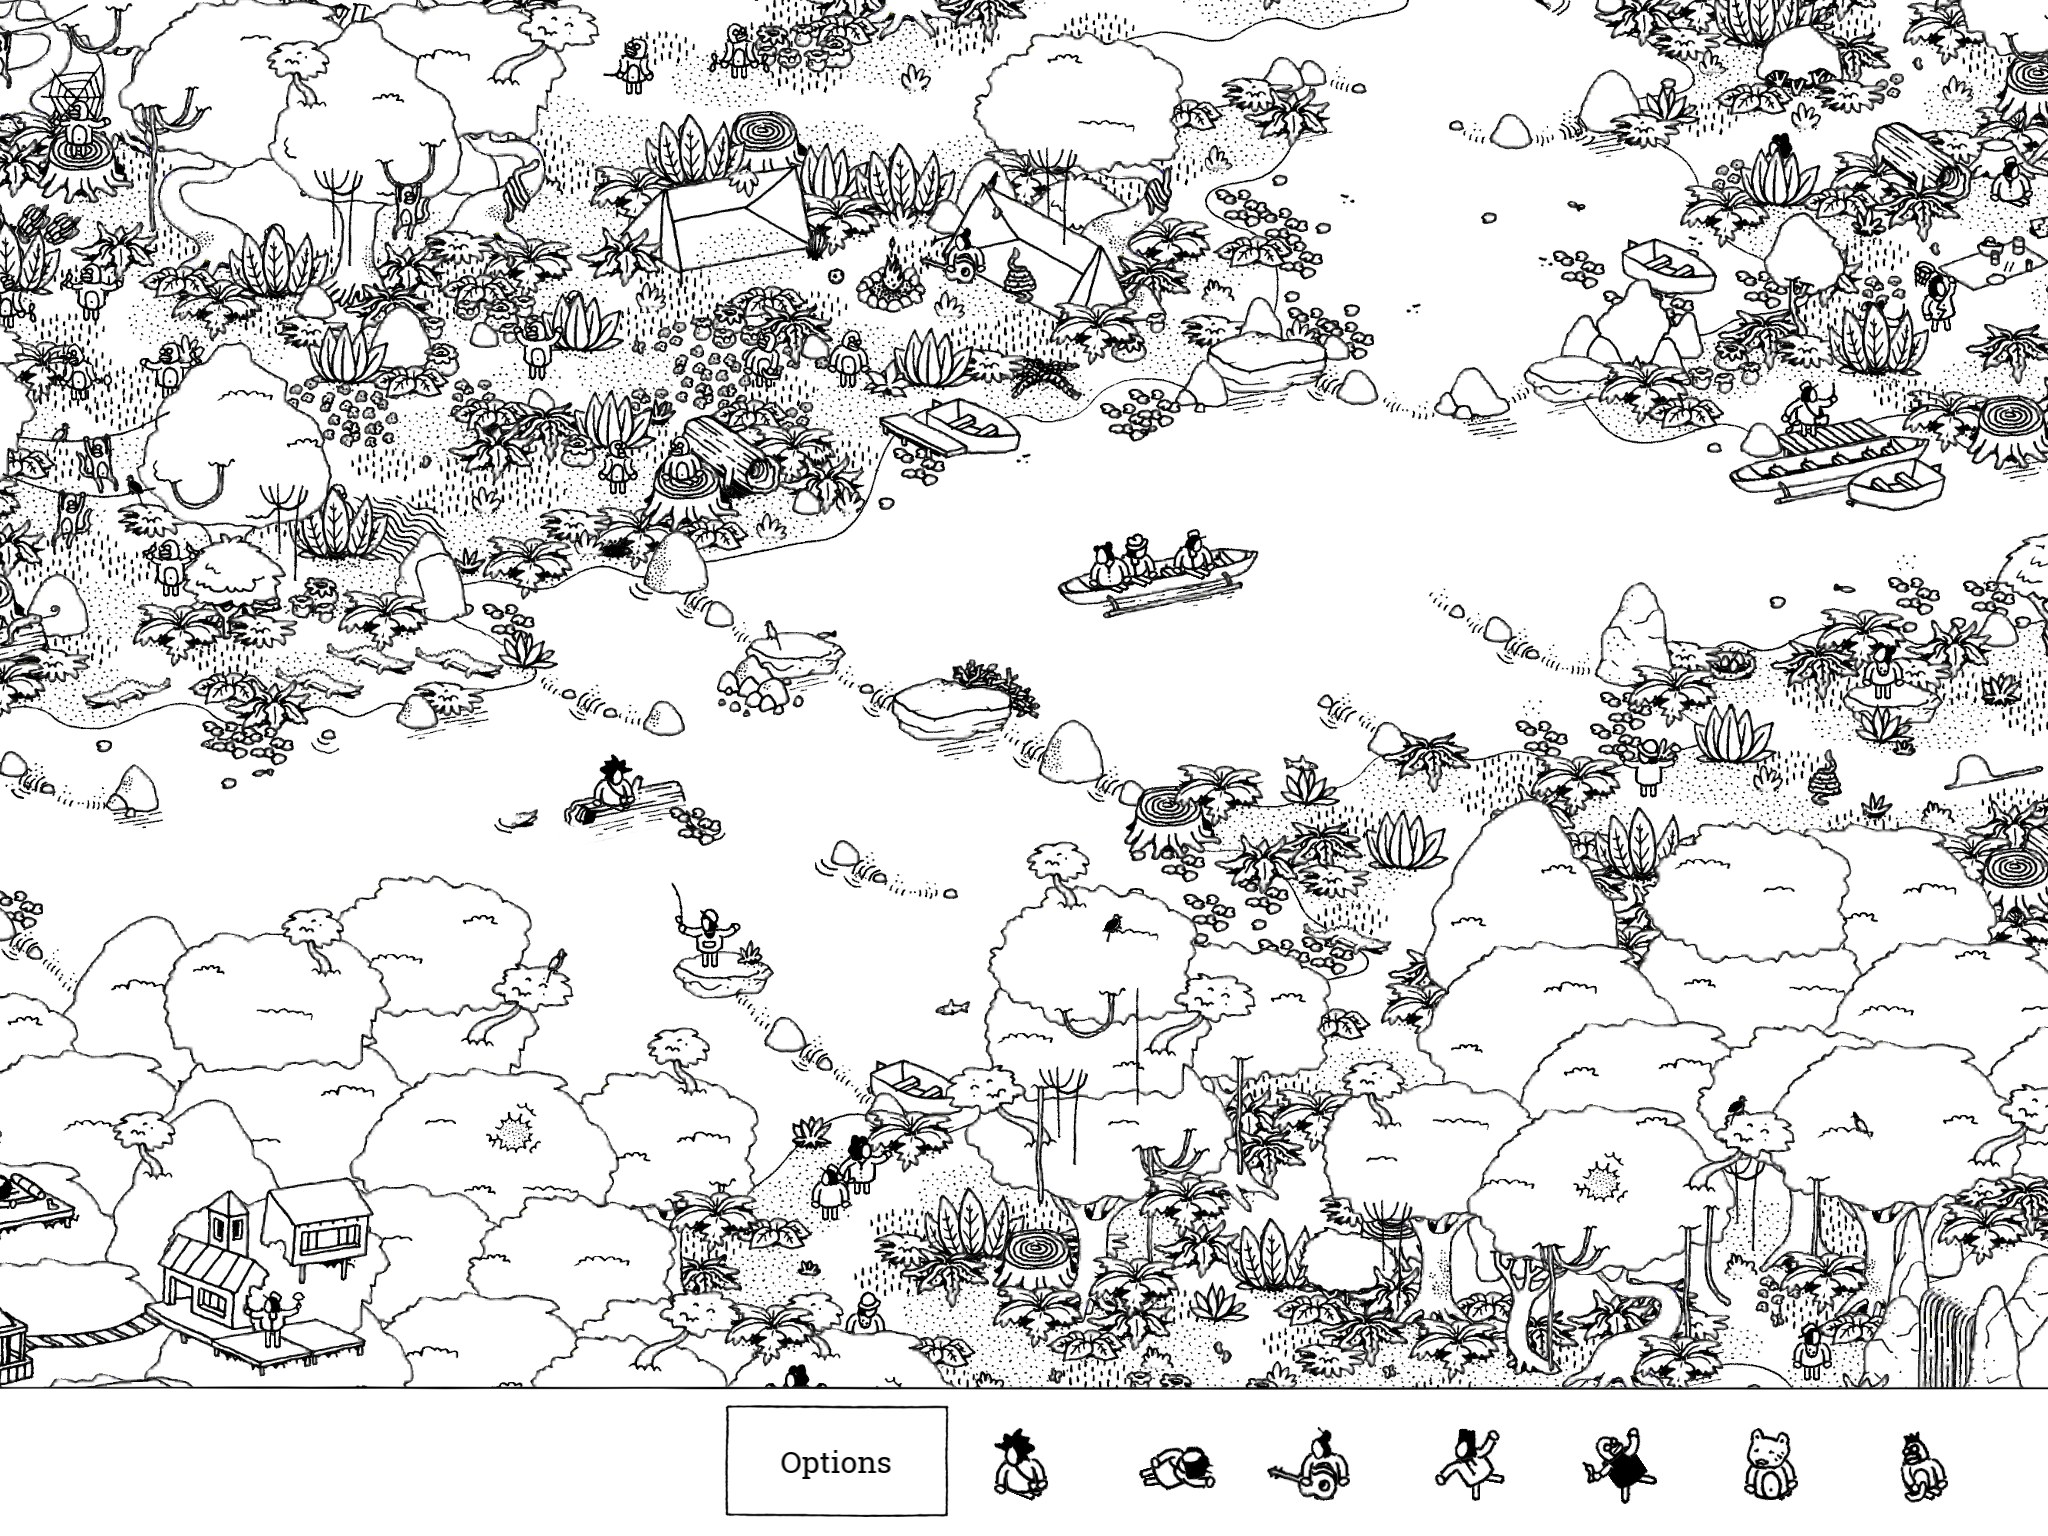 'Hidden Folks' Review - Seek This Game Out